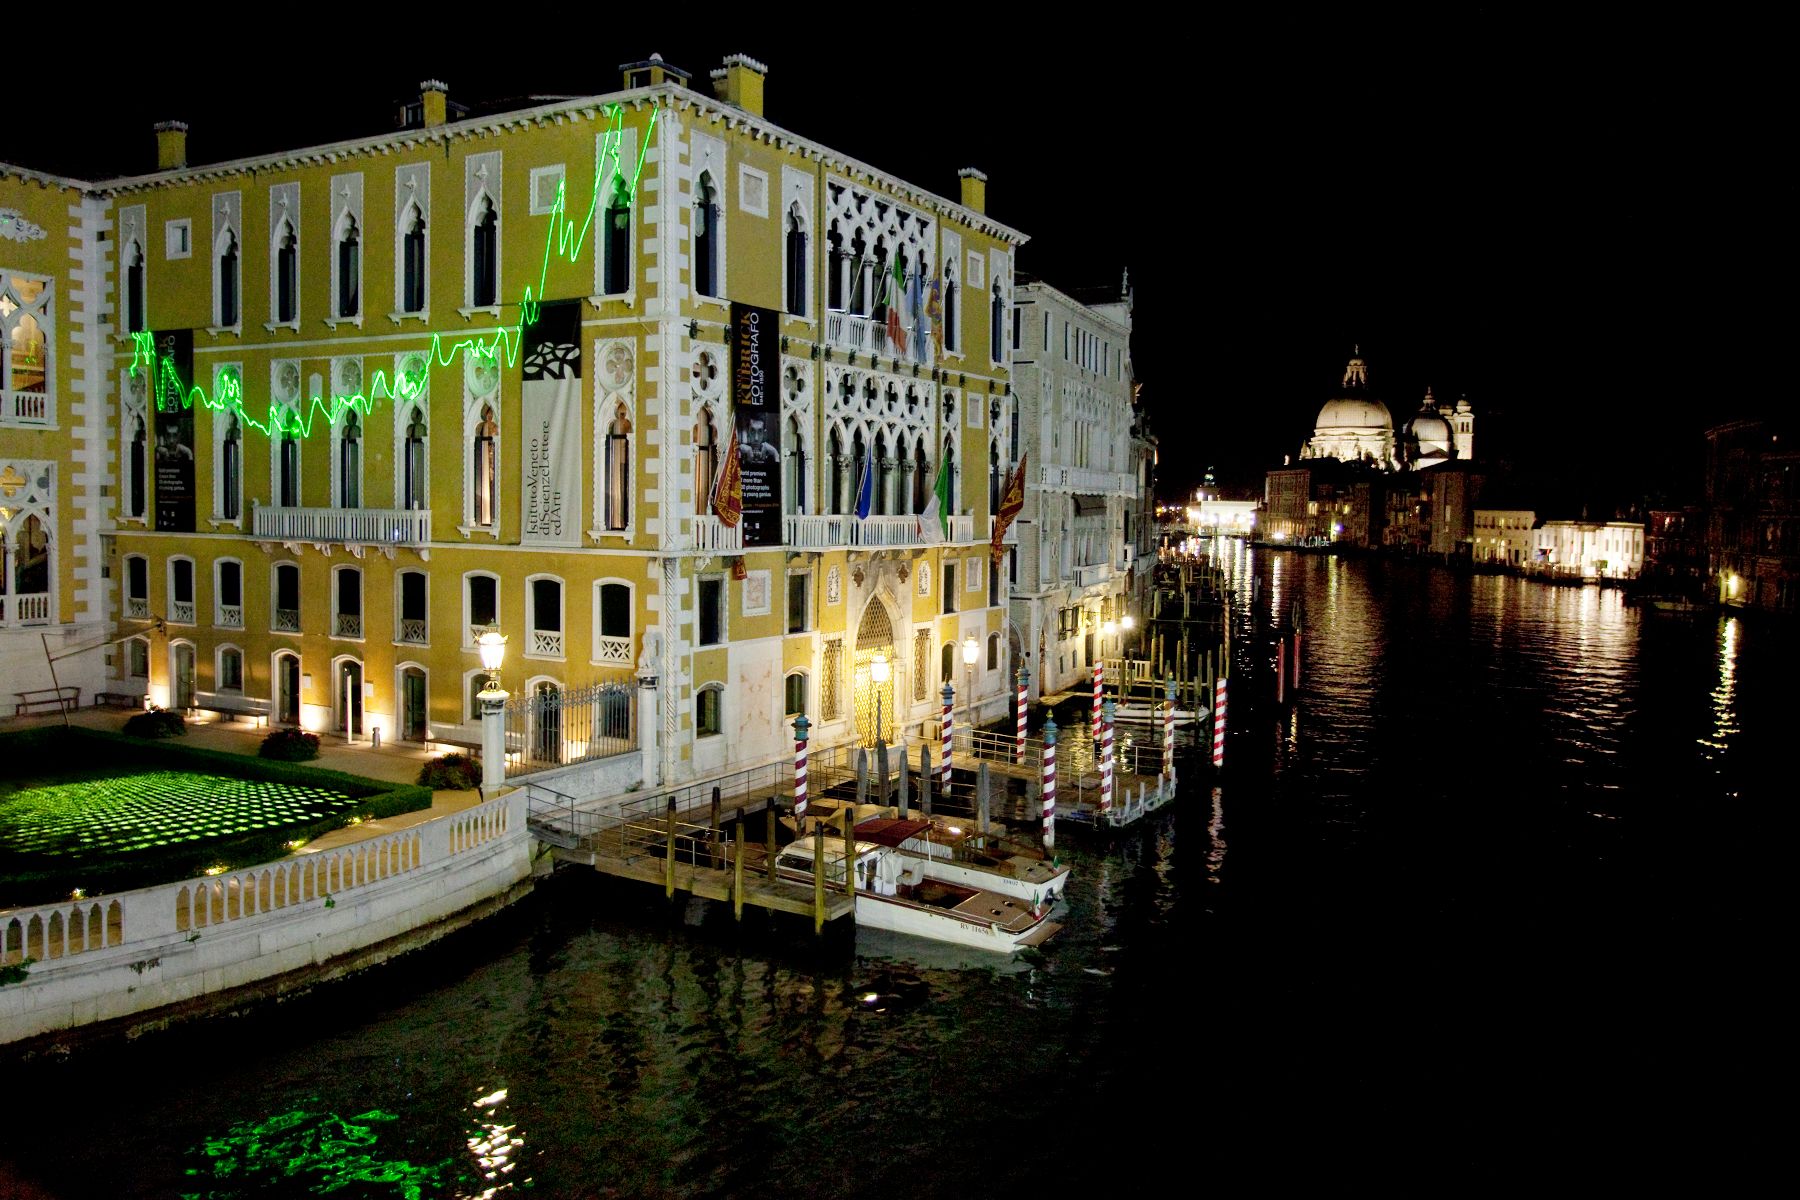 A jagged green line of laser light, resembling an EKG, plays across the face of a yellow and white building on the Venice canals at night.